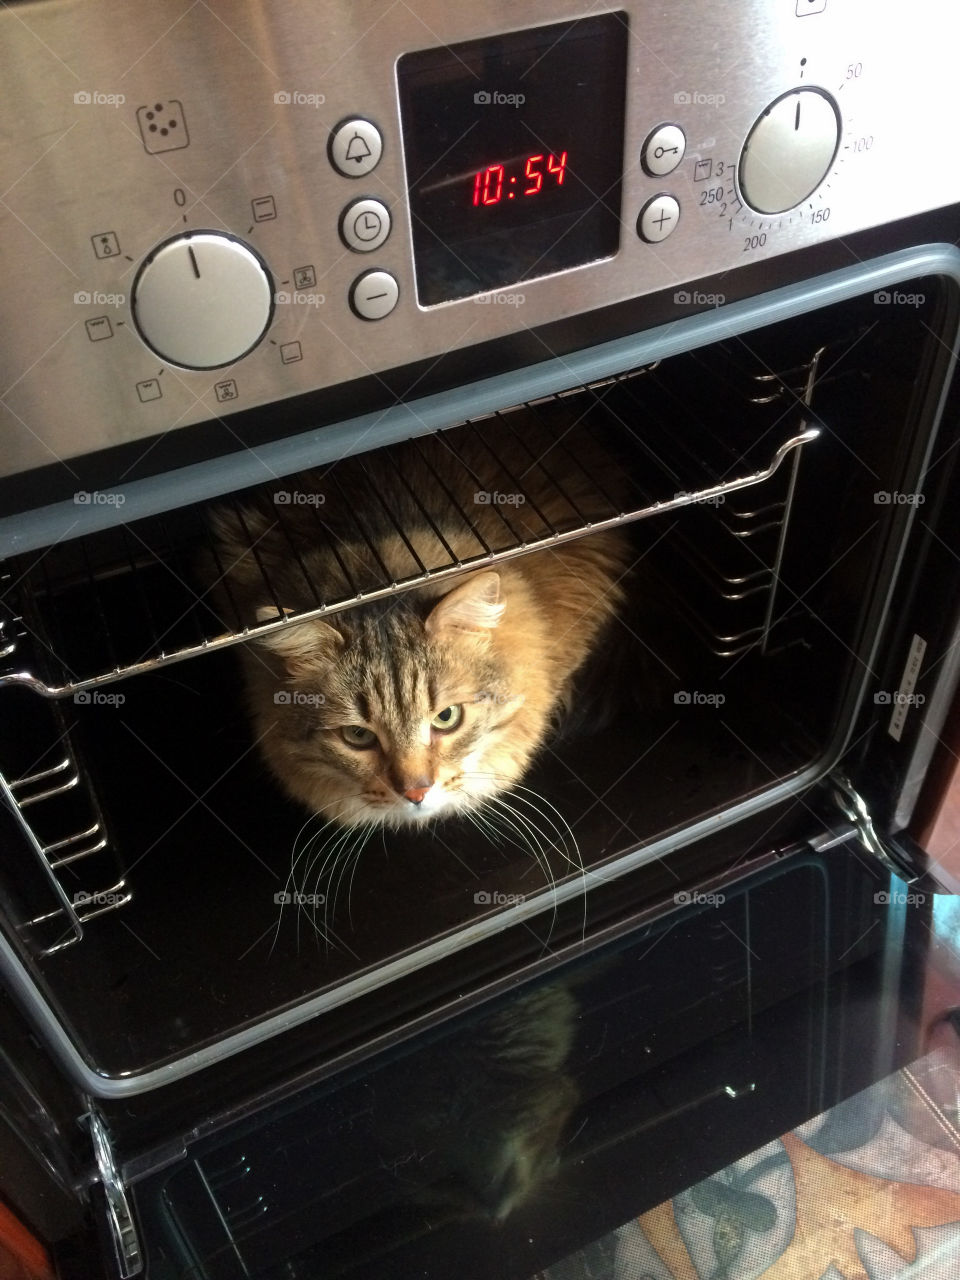 The cat in the oven